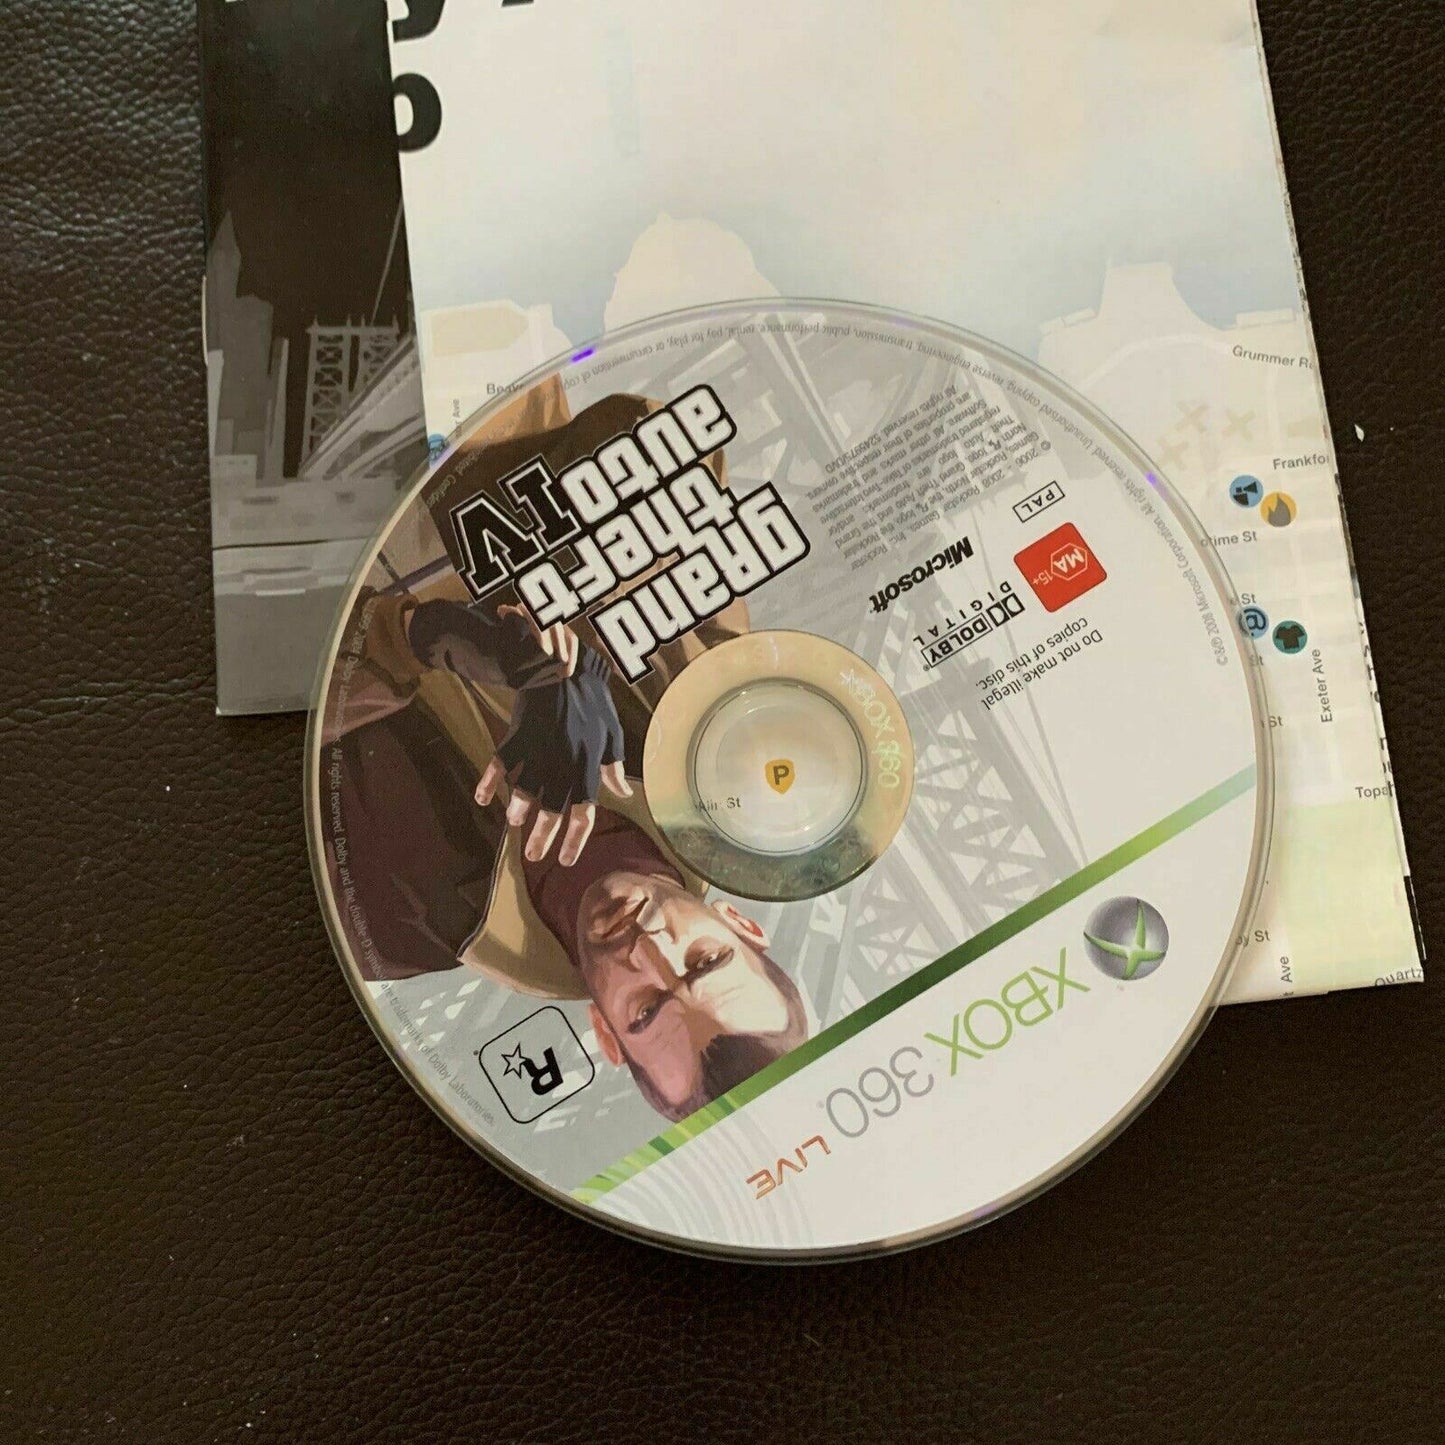 Grand Theft Auto IV - Microsoft XBOX 360 PAL Game with Manual & Map